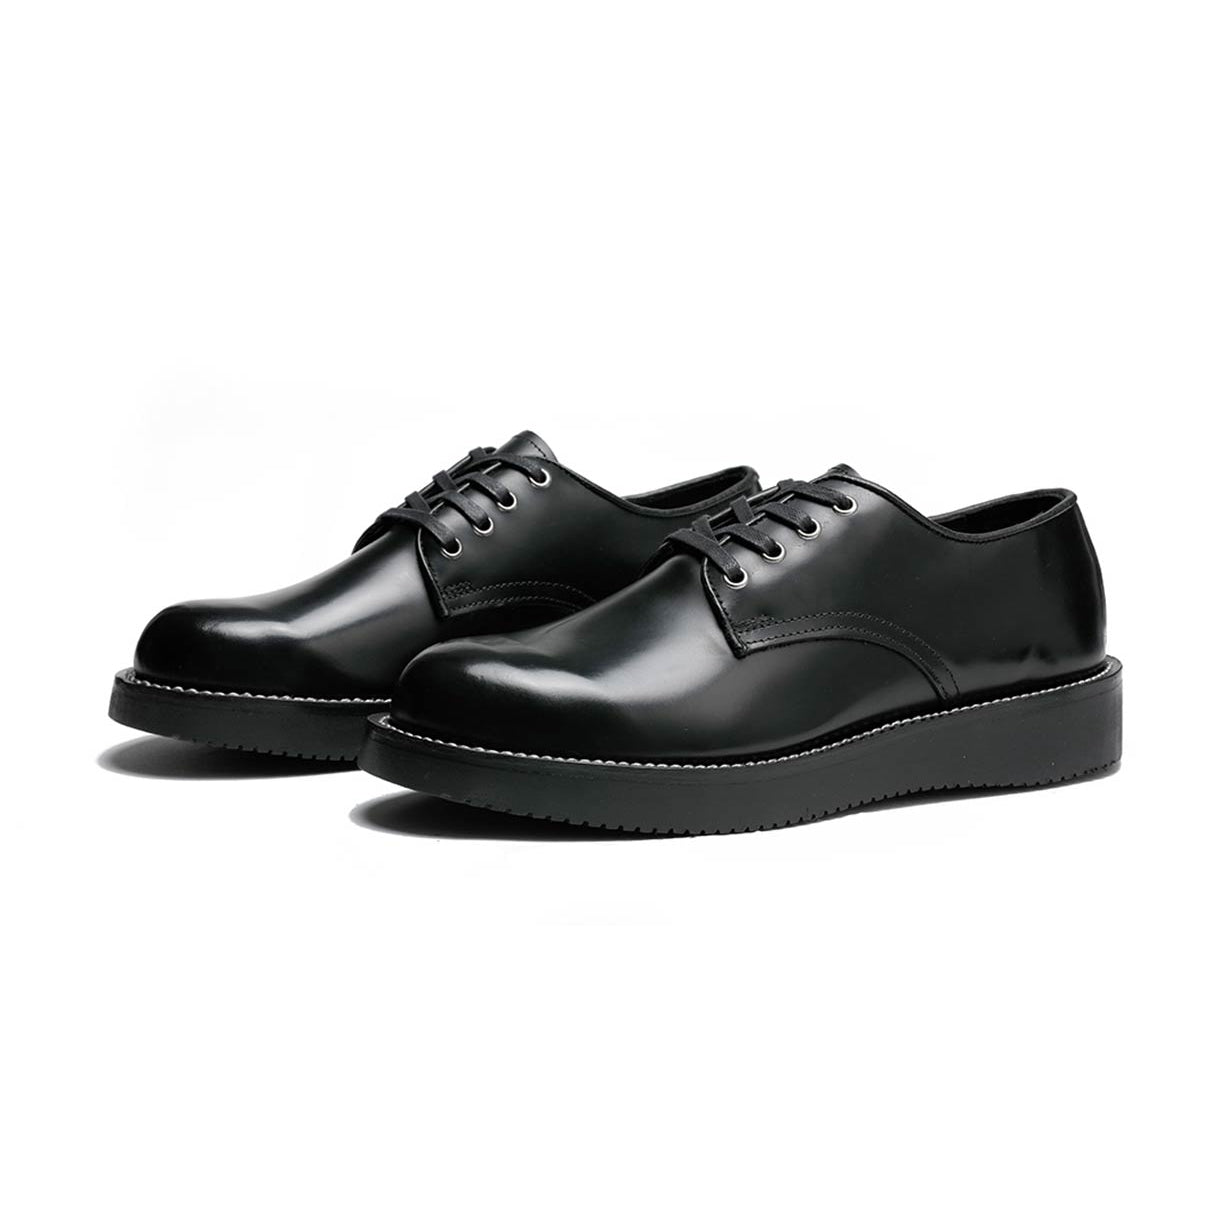 A pair of black Michael derby shoes by Broken Homme with leather uppers and a vibram wedge outsole on a white background.